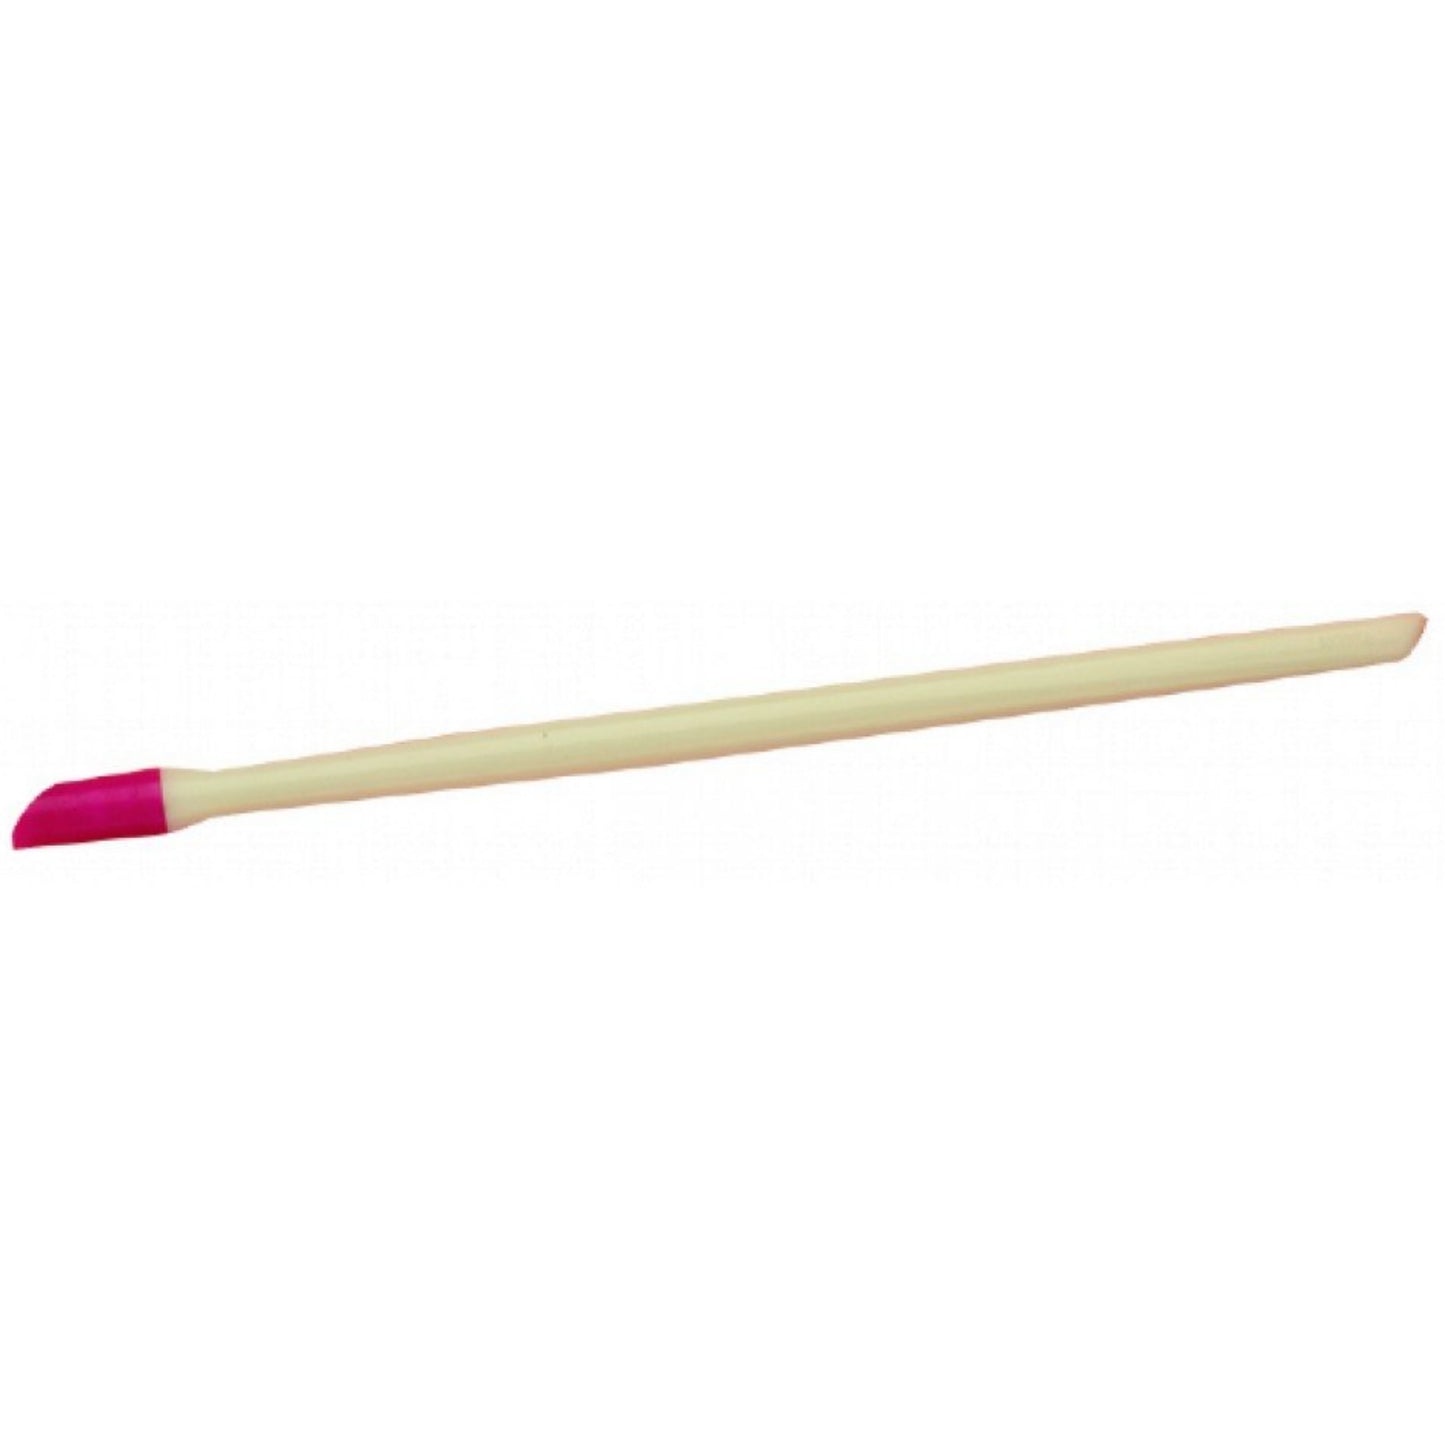 Hive Rubber Ended Hoof Stick with Plastic Handle